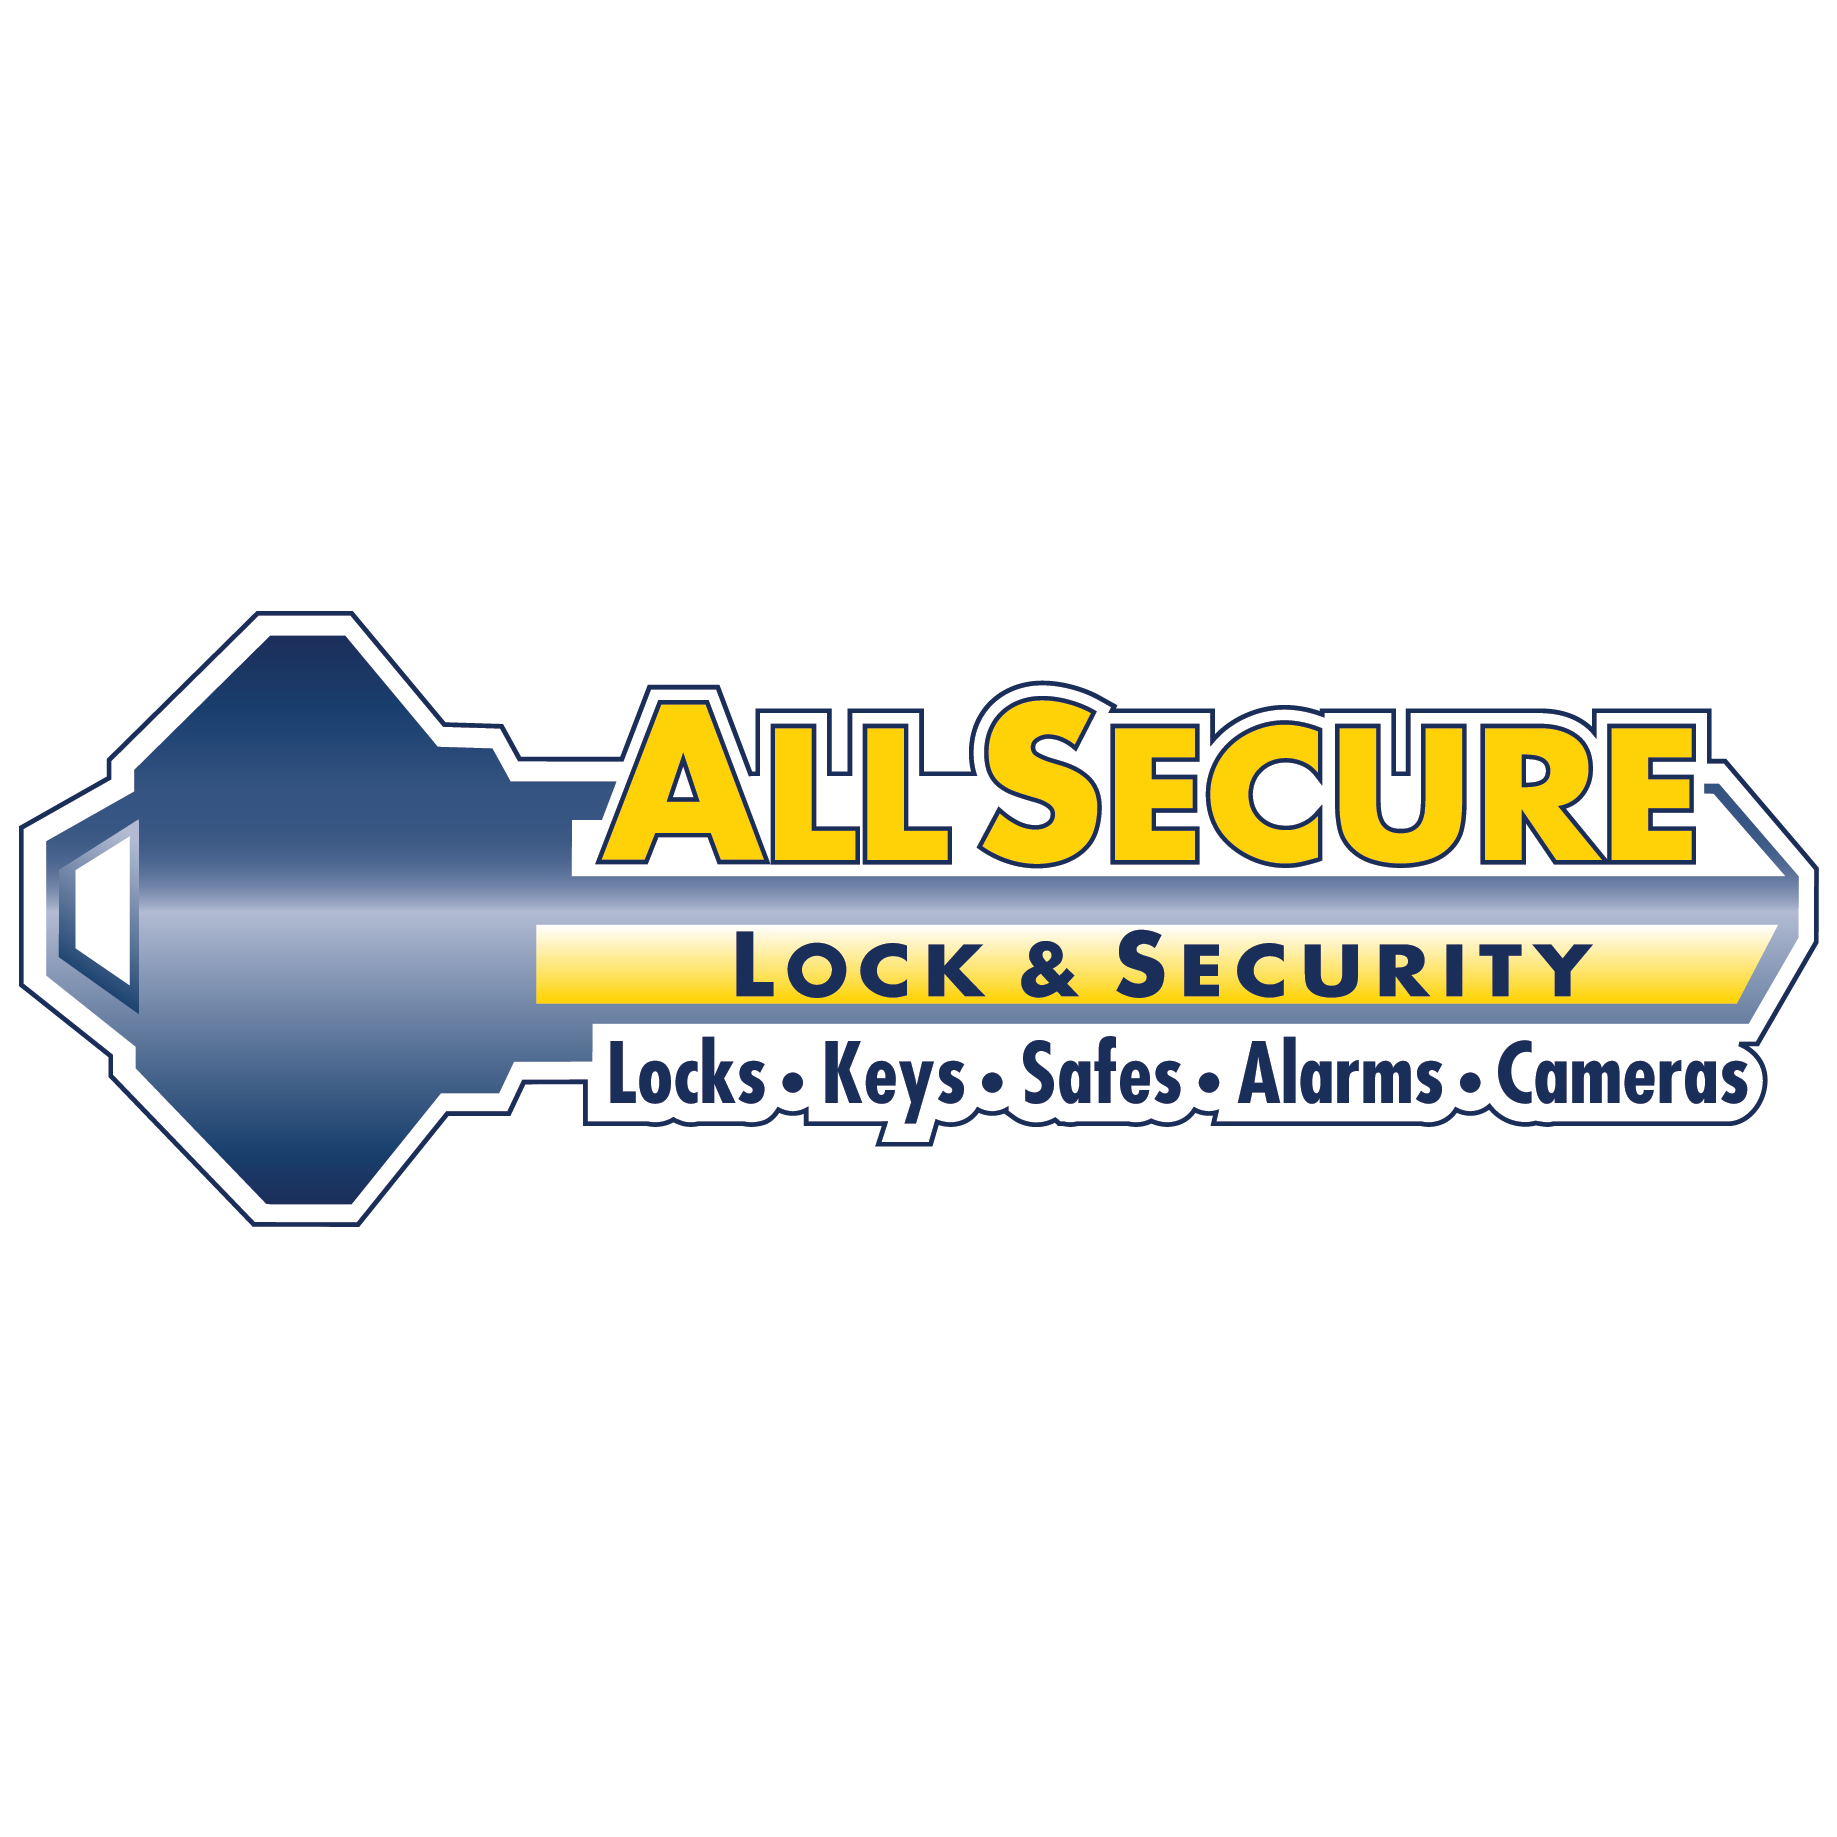 All Secure Lock & Security Logo